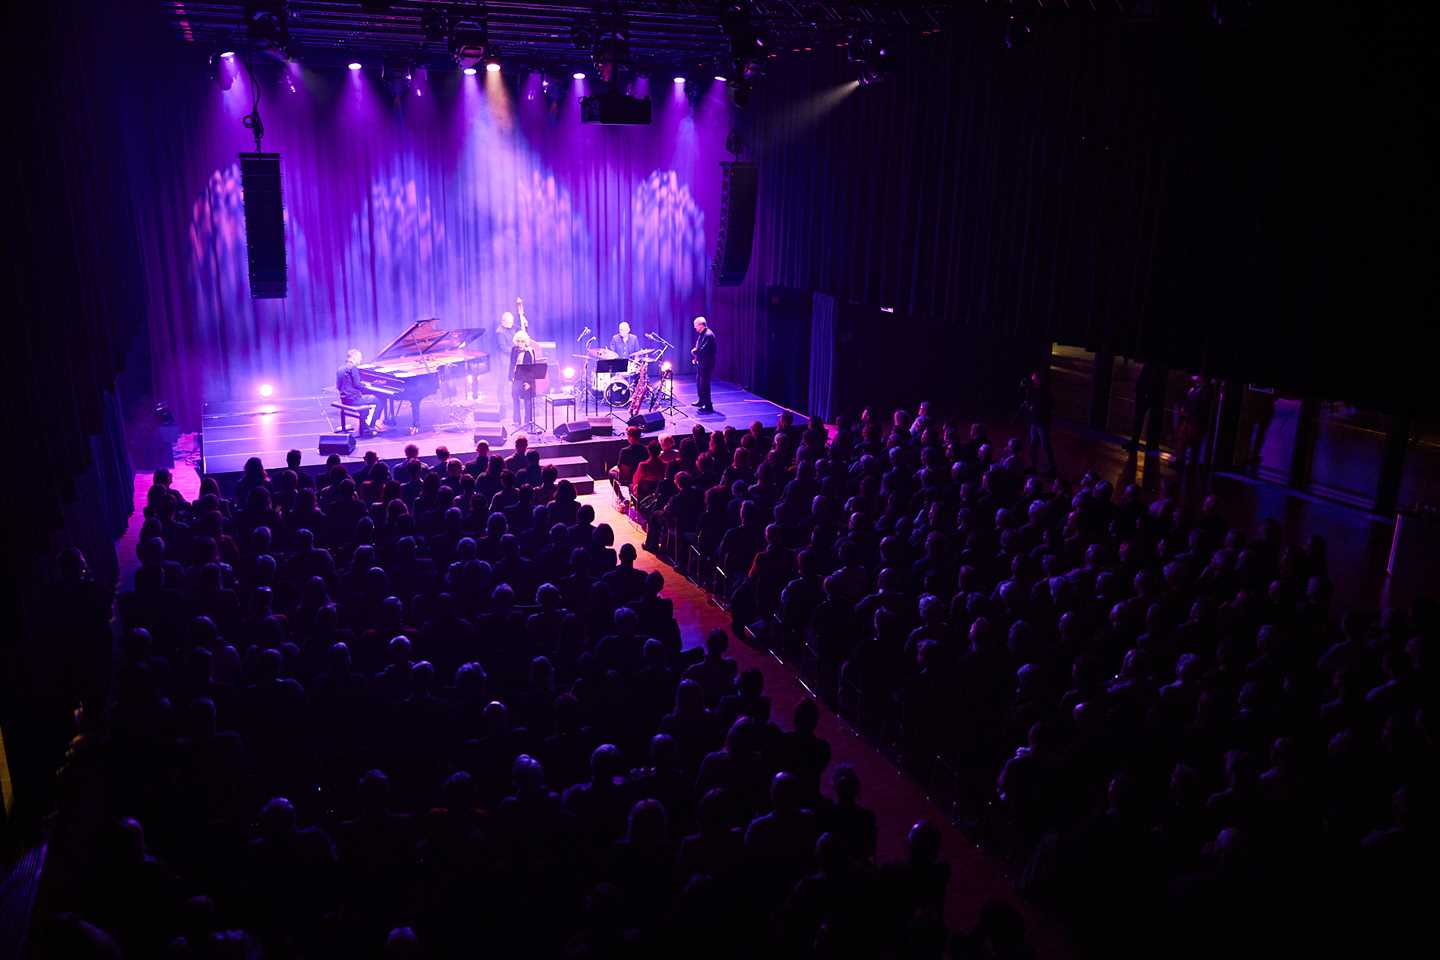 Jazz musicians on stage in a full concert hall